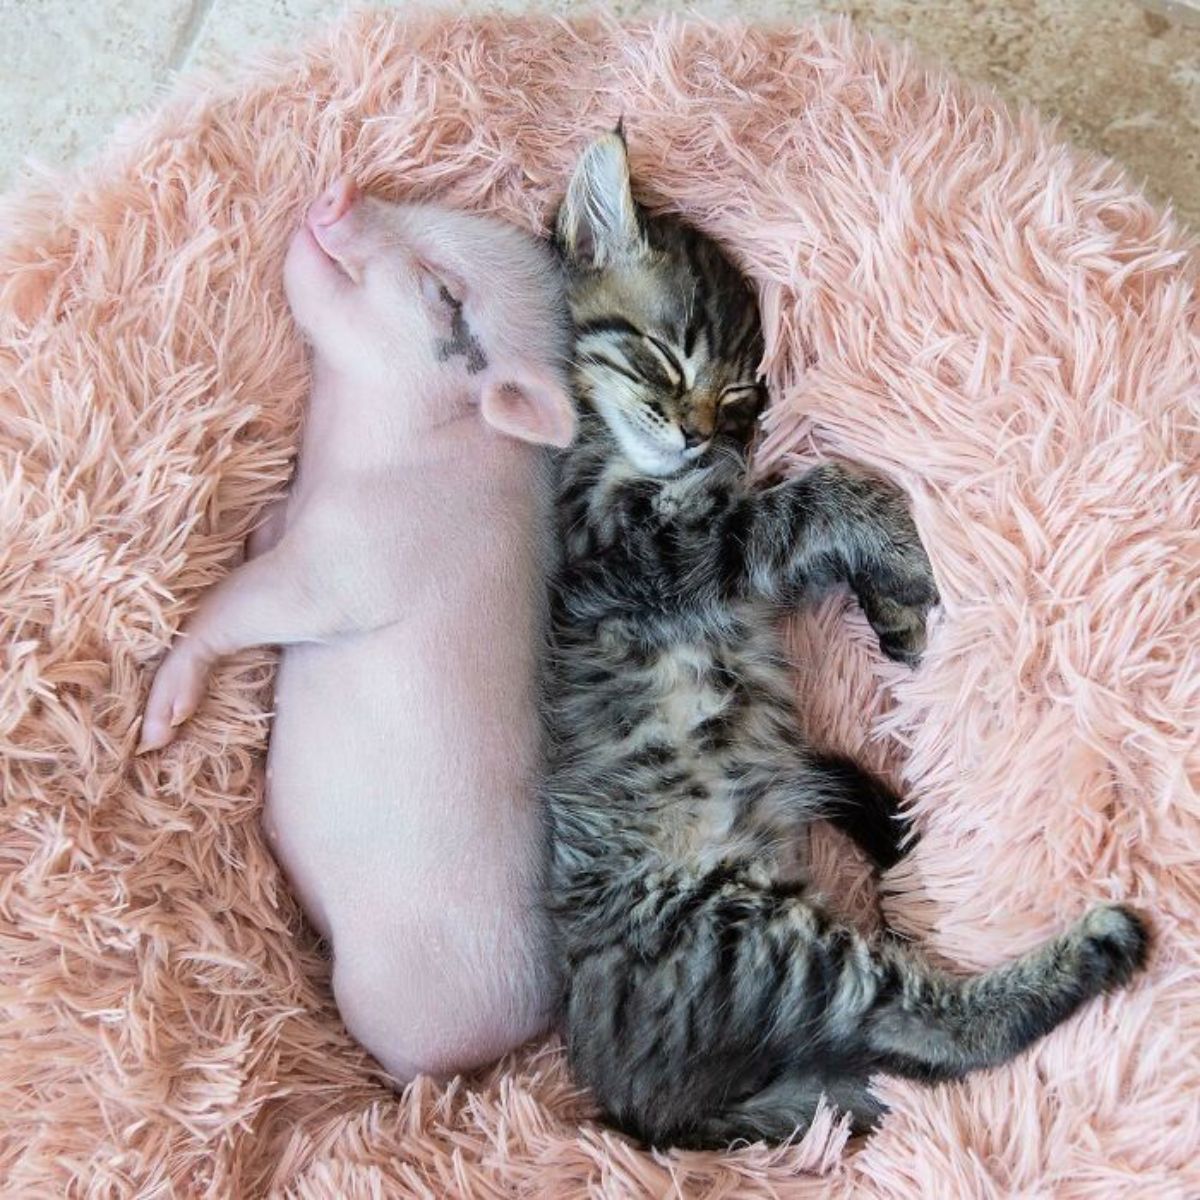 pink piglet and grey tabby sleeping back to back in a cream fluffy cat bed